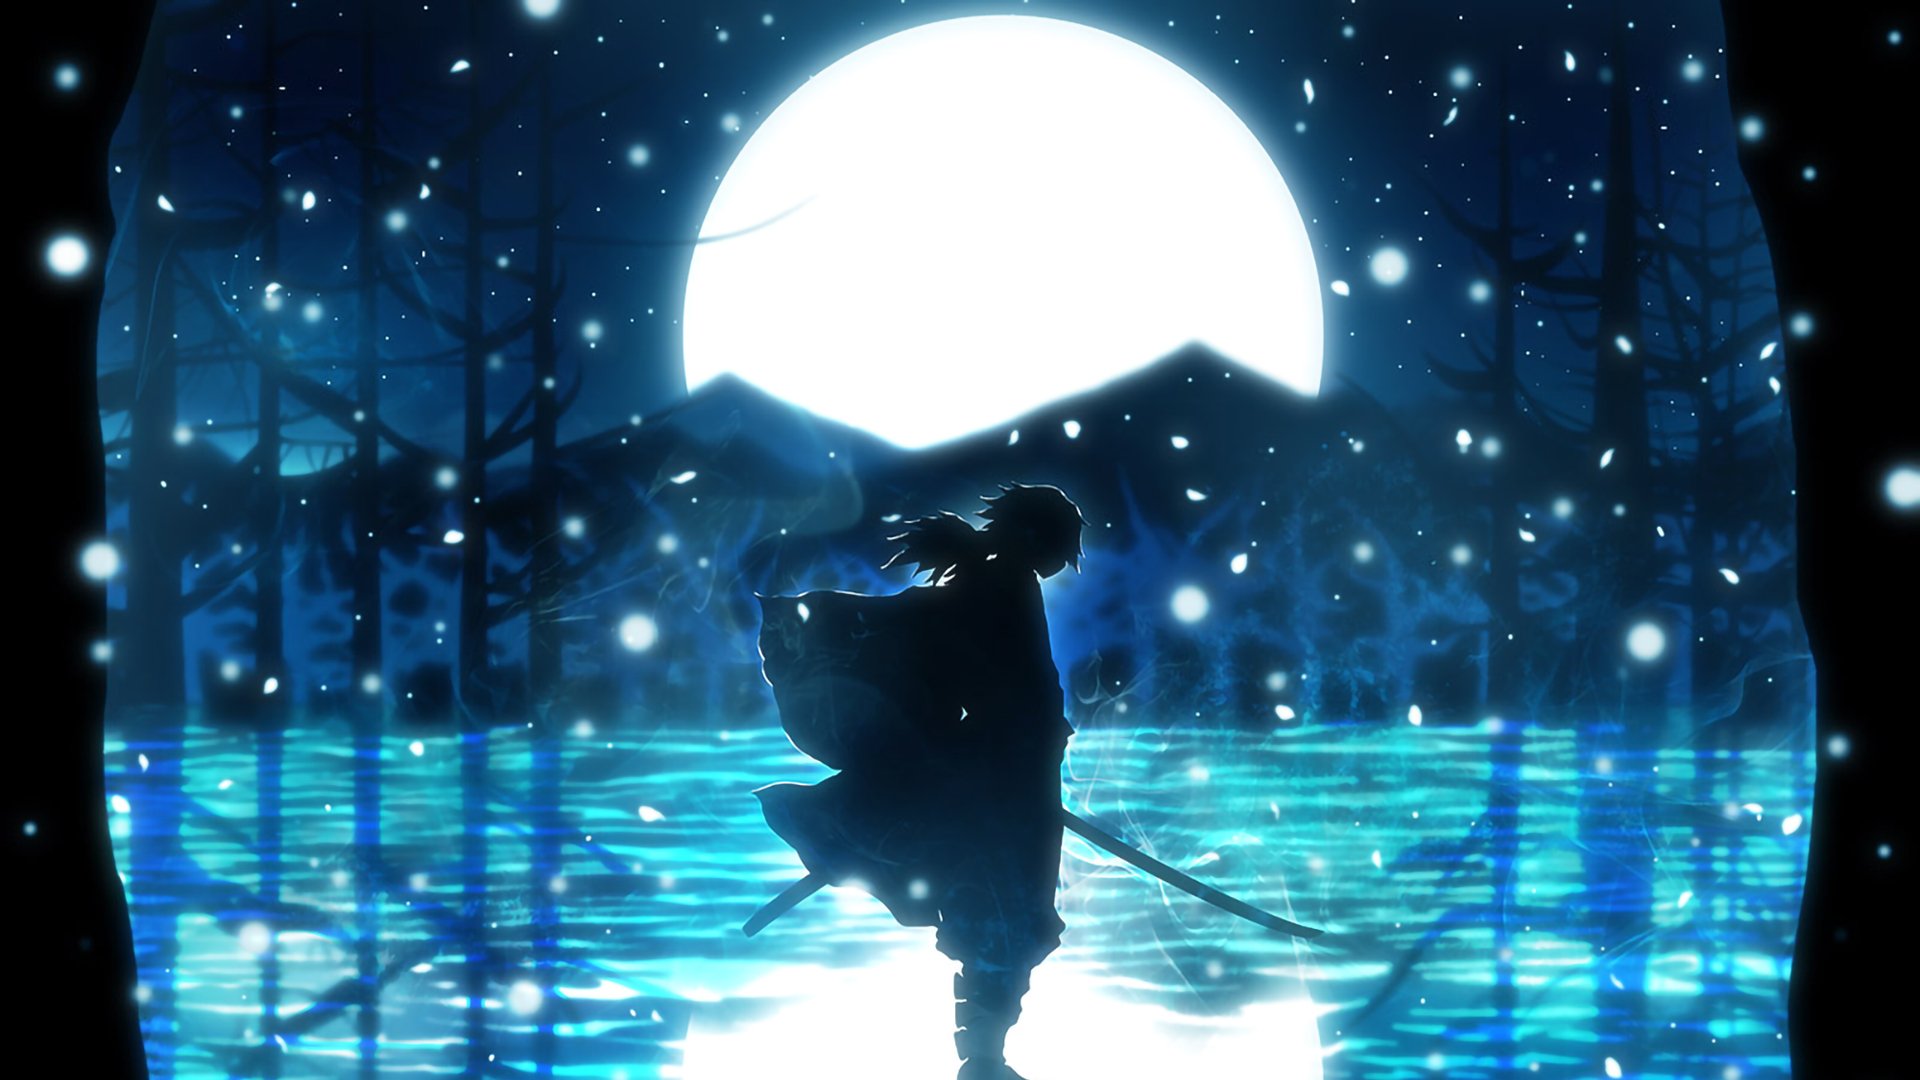 Demon Slayer Giyuu Tomioka With Sword With Background Of Moon Light During Night And Glittering White Dots HD Anime Wallpaper